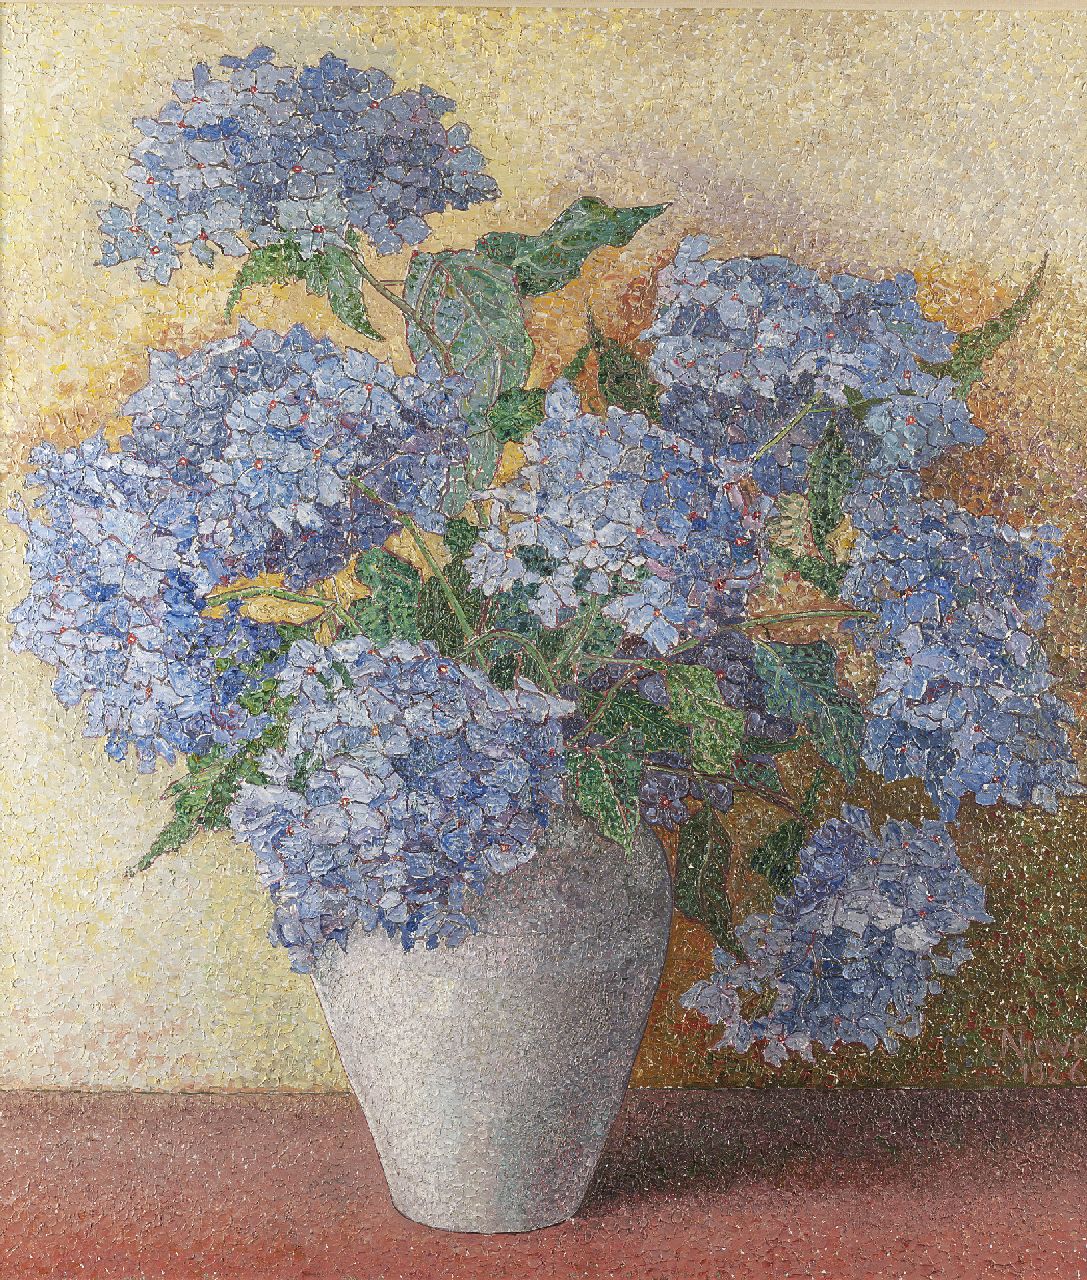 Nieweg J.  | Jakob Nieweg, Hortensia, oil on canvas 85.5 x 75.0 cm, signed l.r. and dated 1926